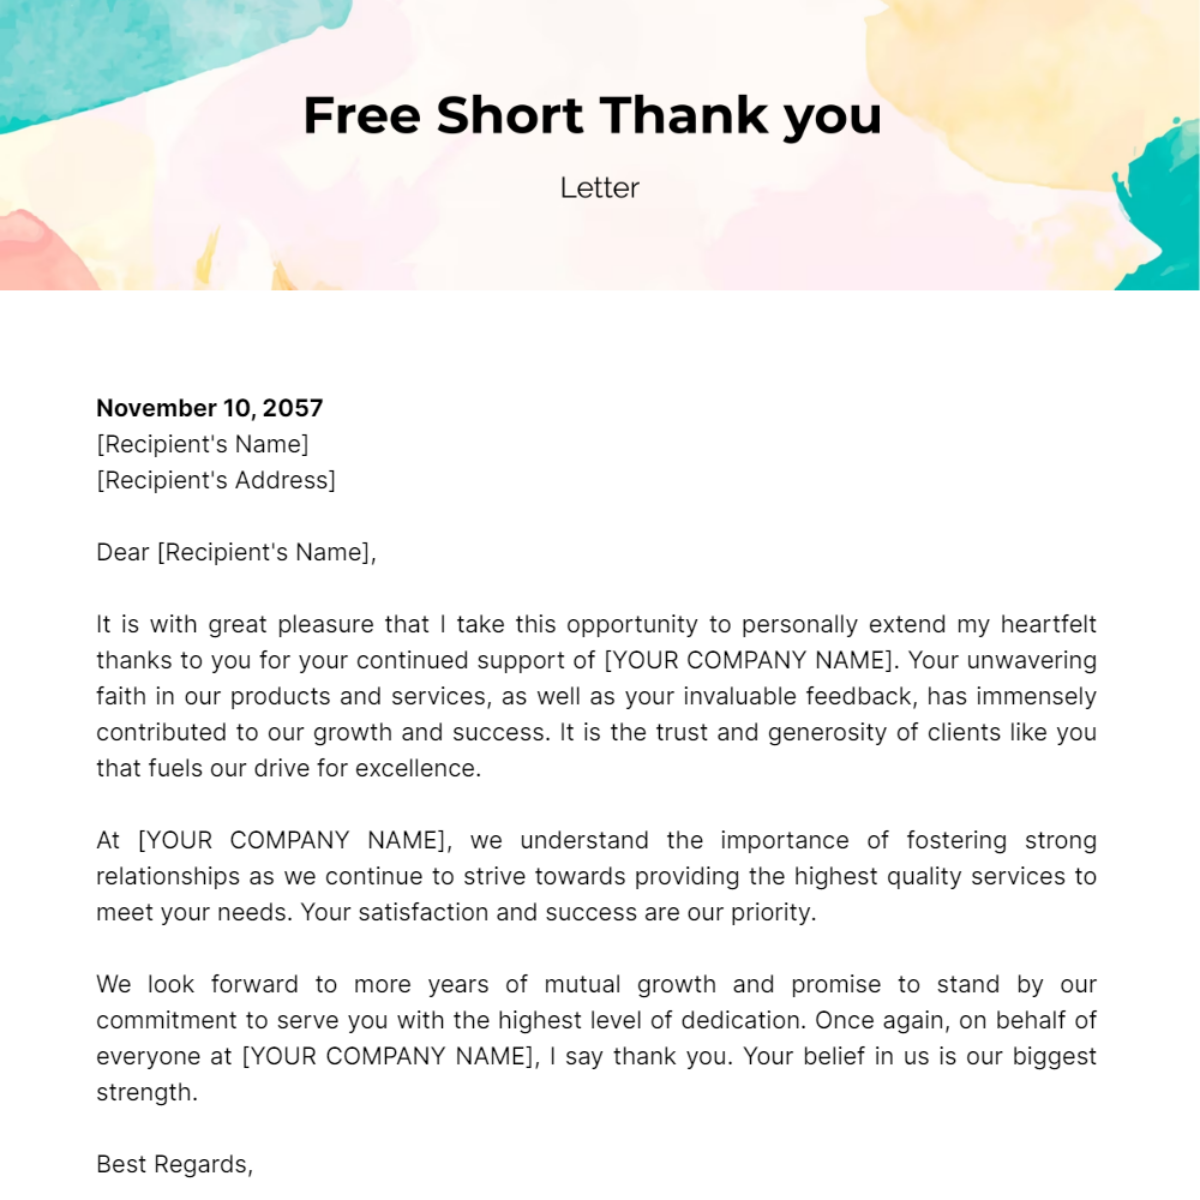 Short Thank you Letter Template